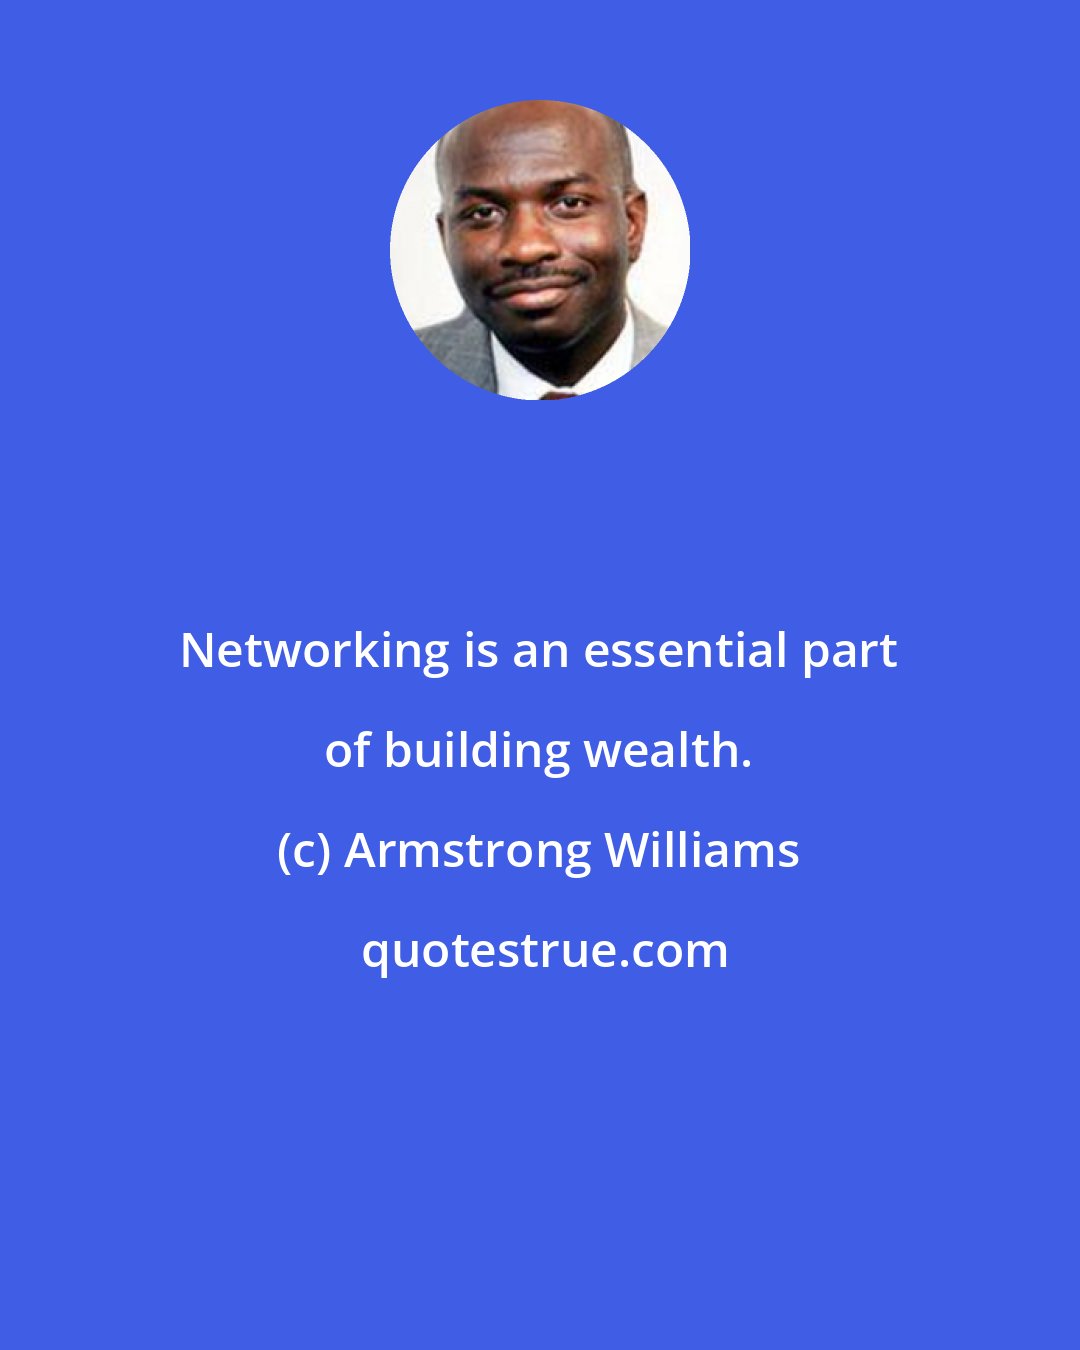 Armstrong Williams: Networking is an essential part of building wealth.